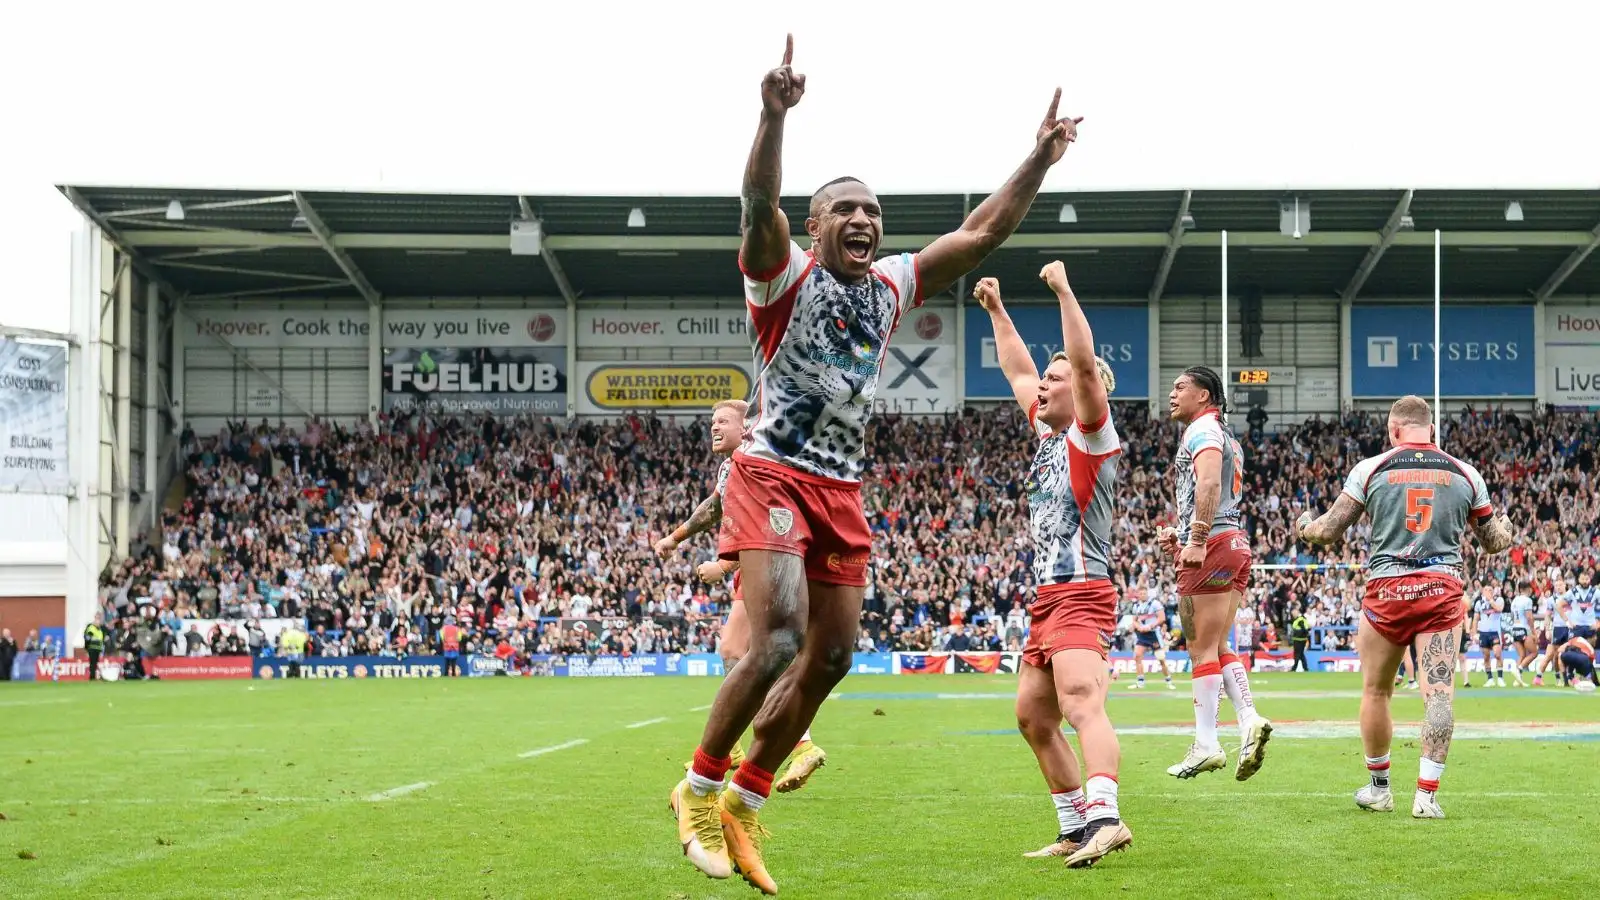 Edwin Ipape discusses Leigh Leopards’ desire to silence doubters and how they’ve done just that ahead of Challenge Cup final